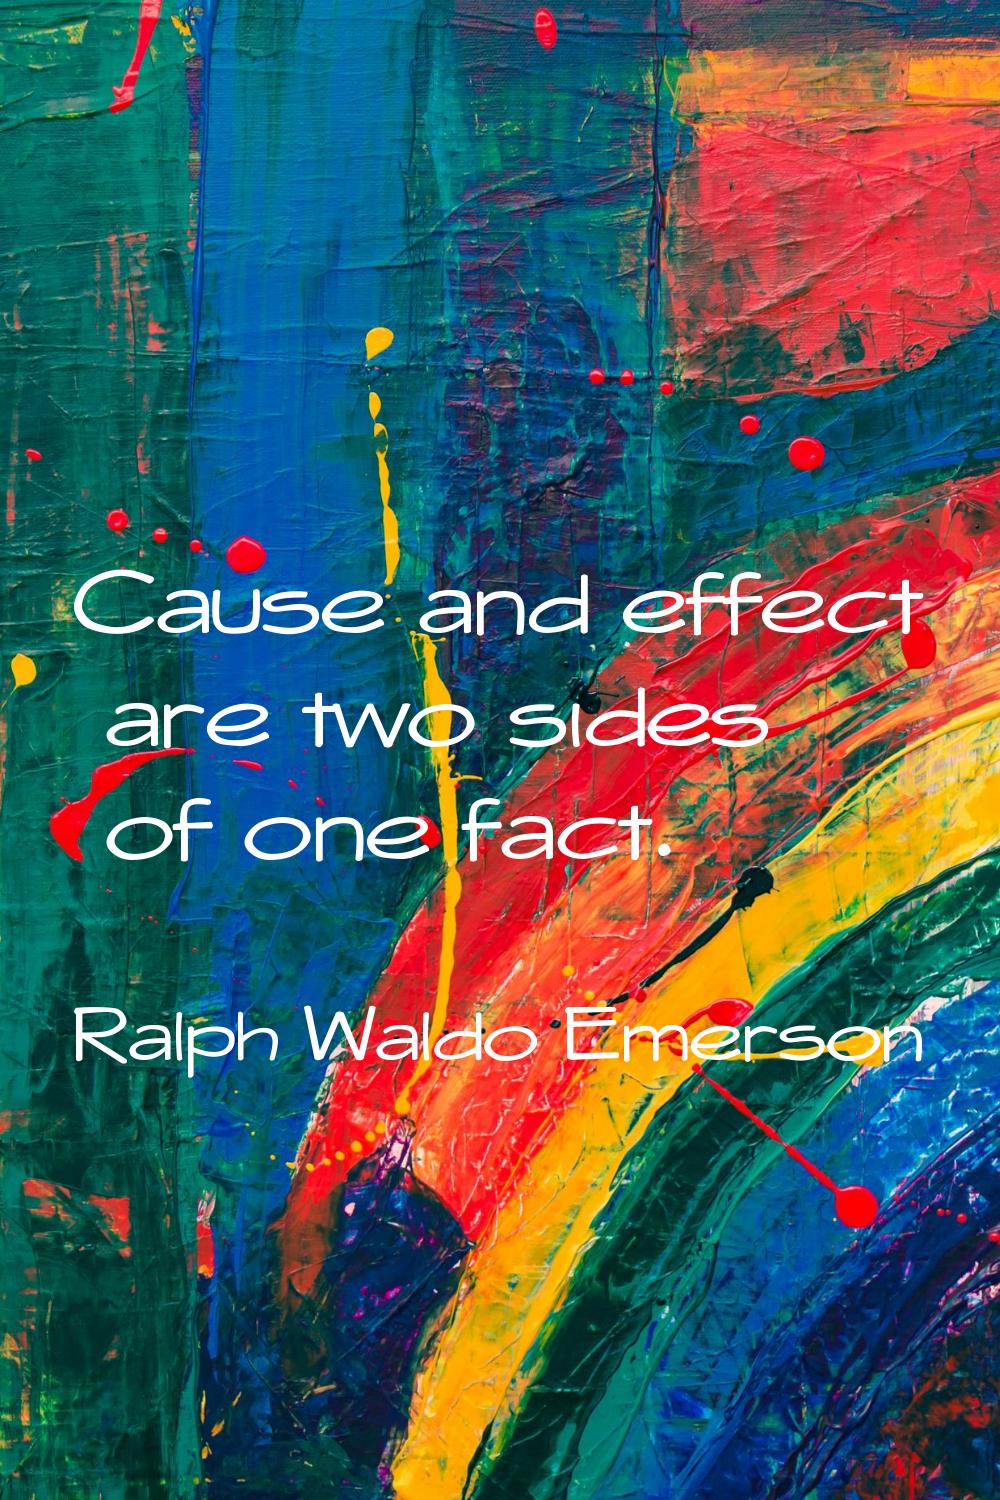 Cause and effect are two sides of one fact.